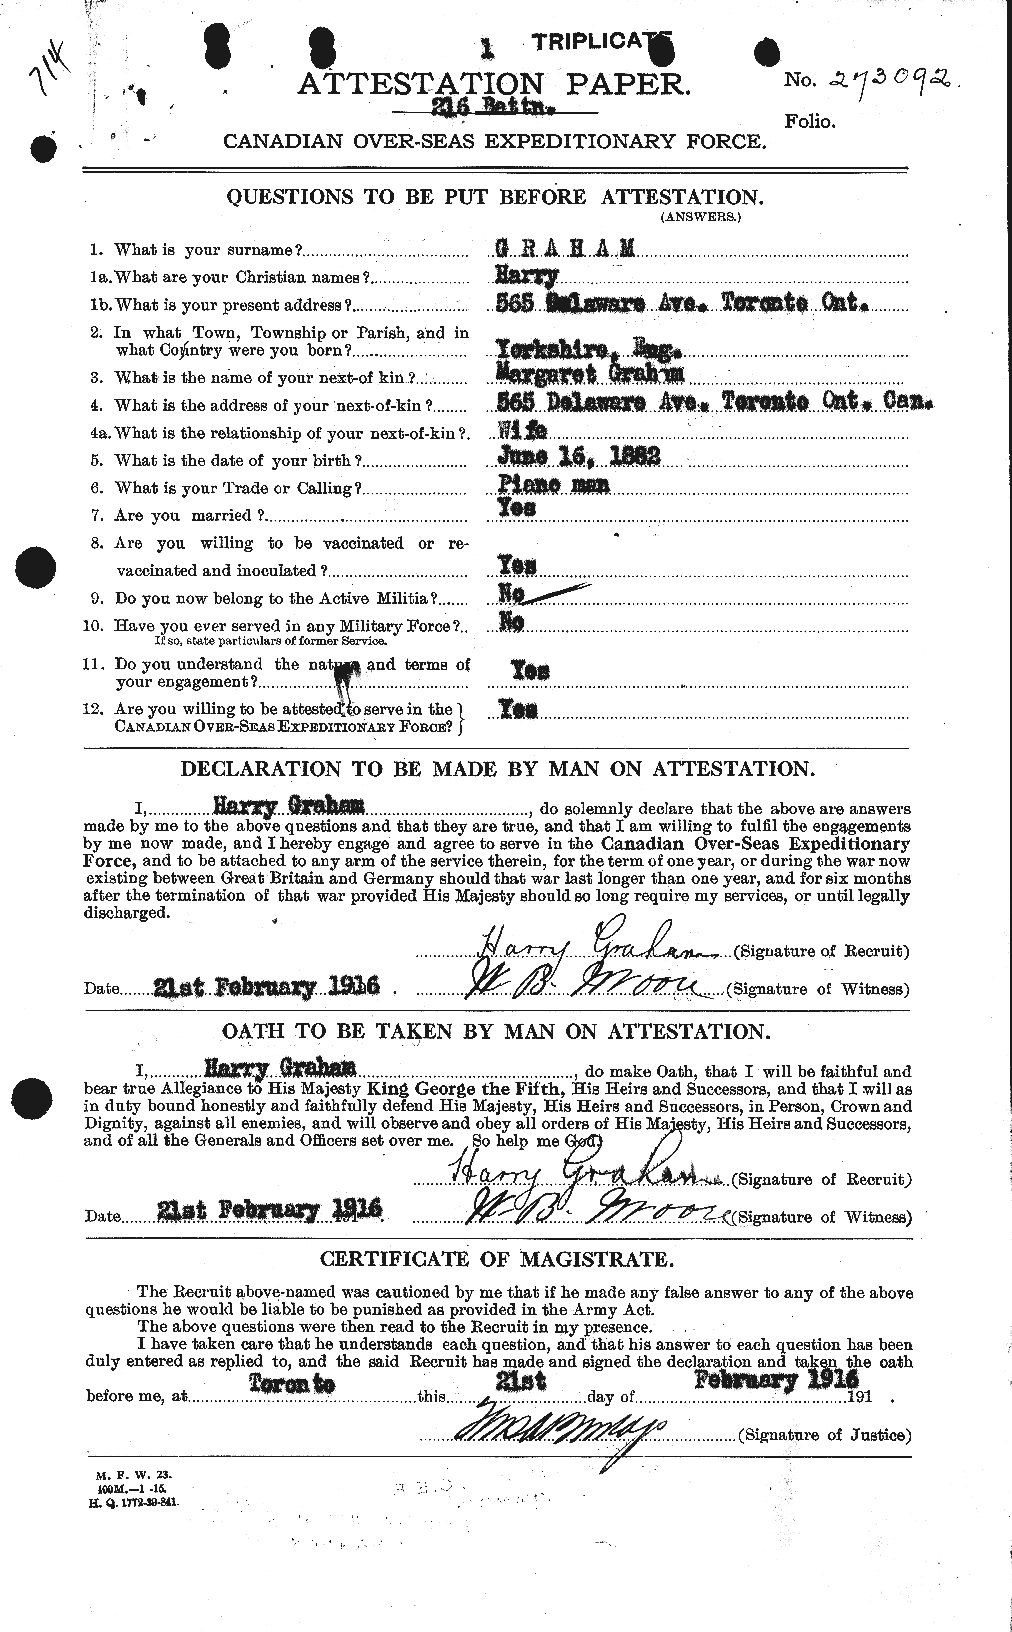 Personnel Records of the First World War - CEF 357713a